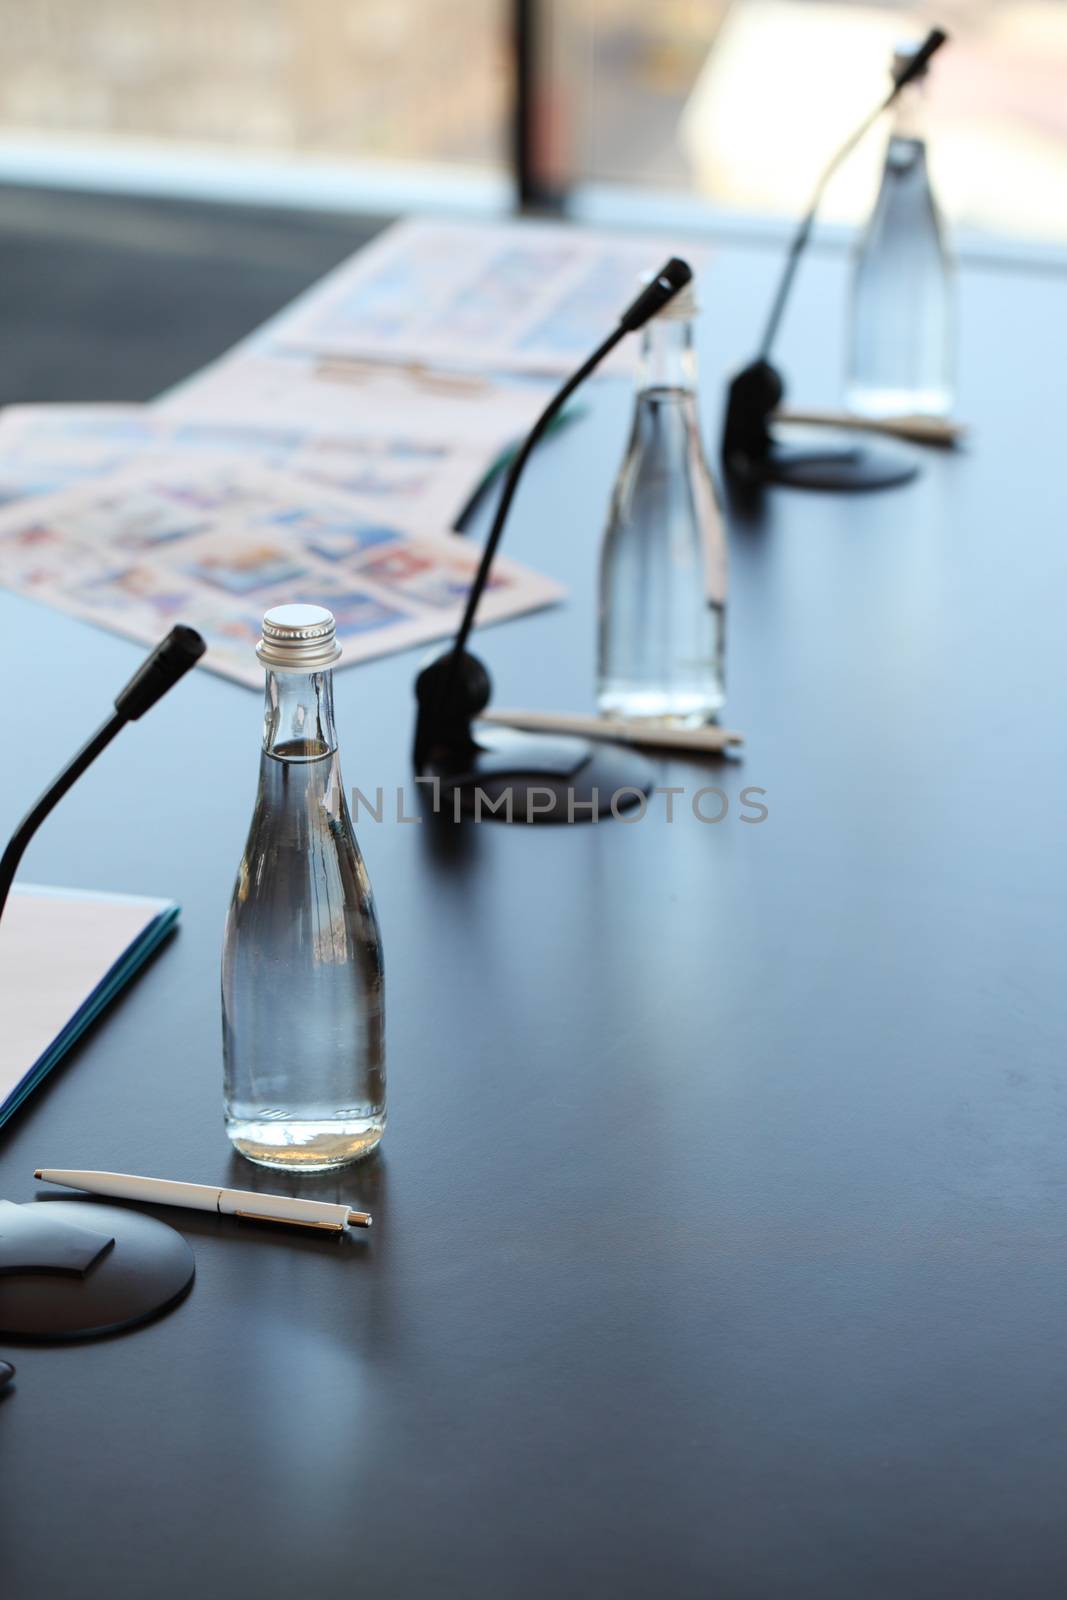 Conference room table for business meeting with microphones and bottles of water